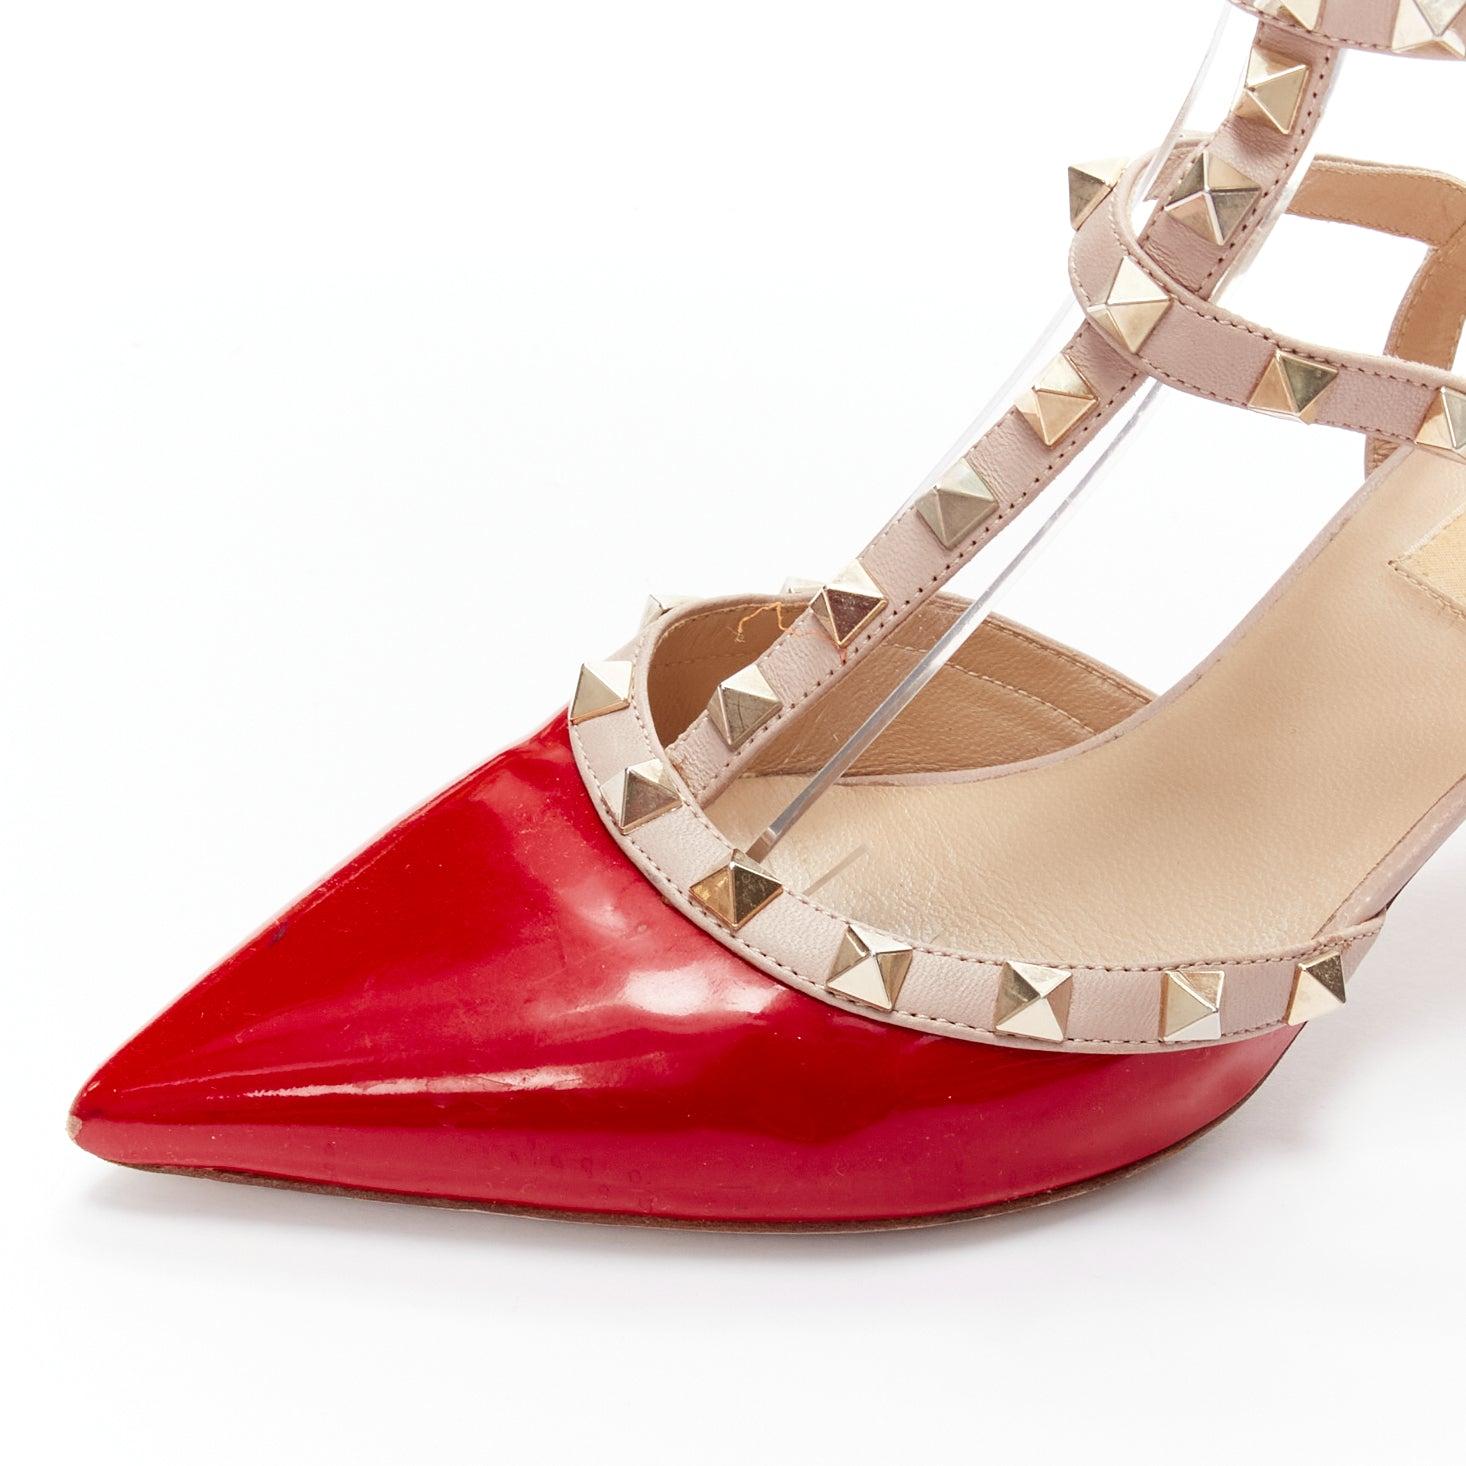 VALENTINO Rockstud red patent leather gold stud caged pump EU38 For Sale 3